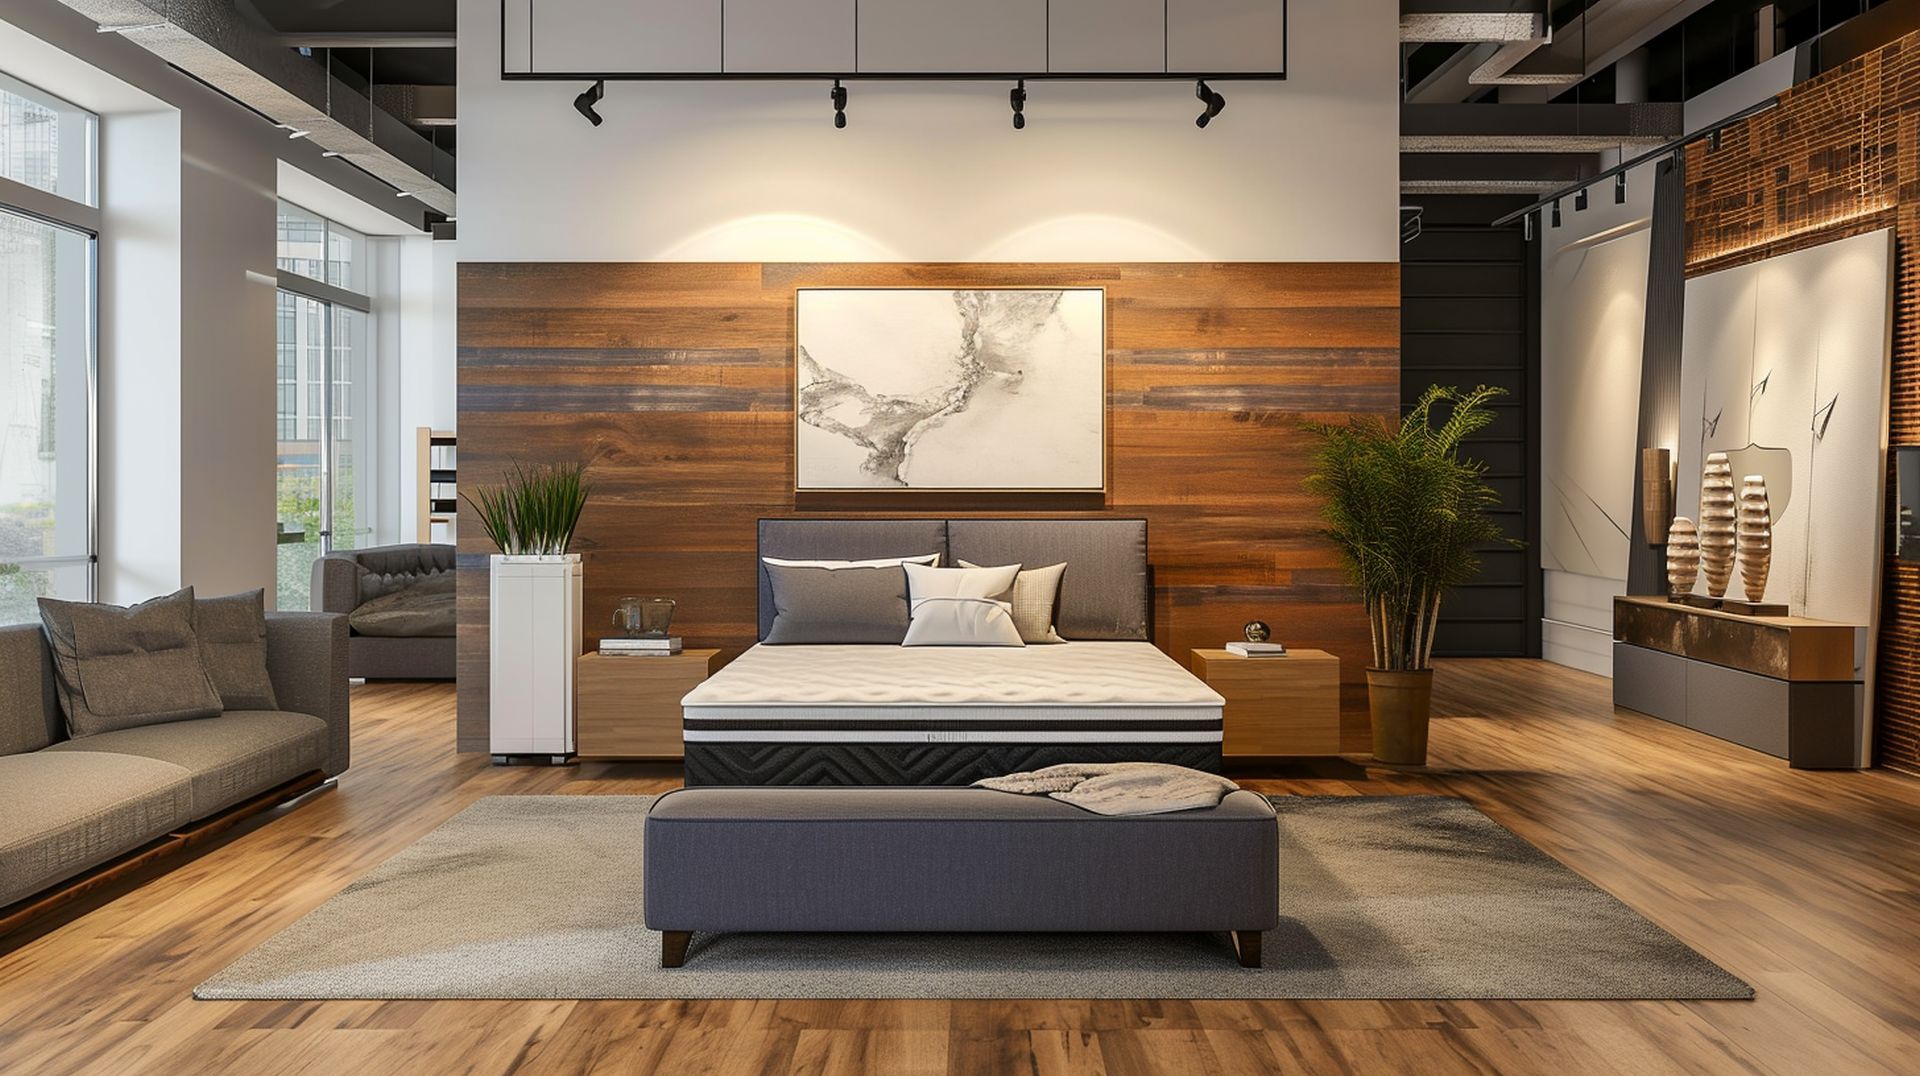 If you're looking for a new bed, mattress stores in Peoria offer the best customer and delivery service, financing, and warranties in Arizona